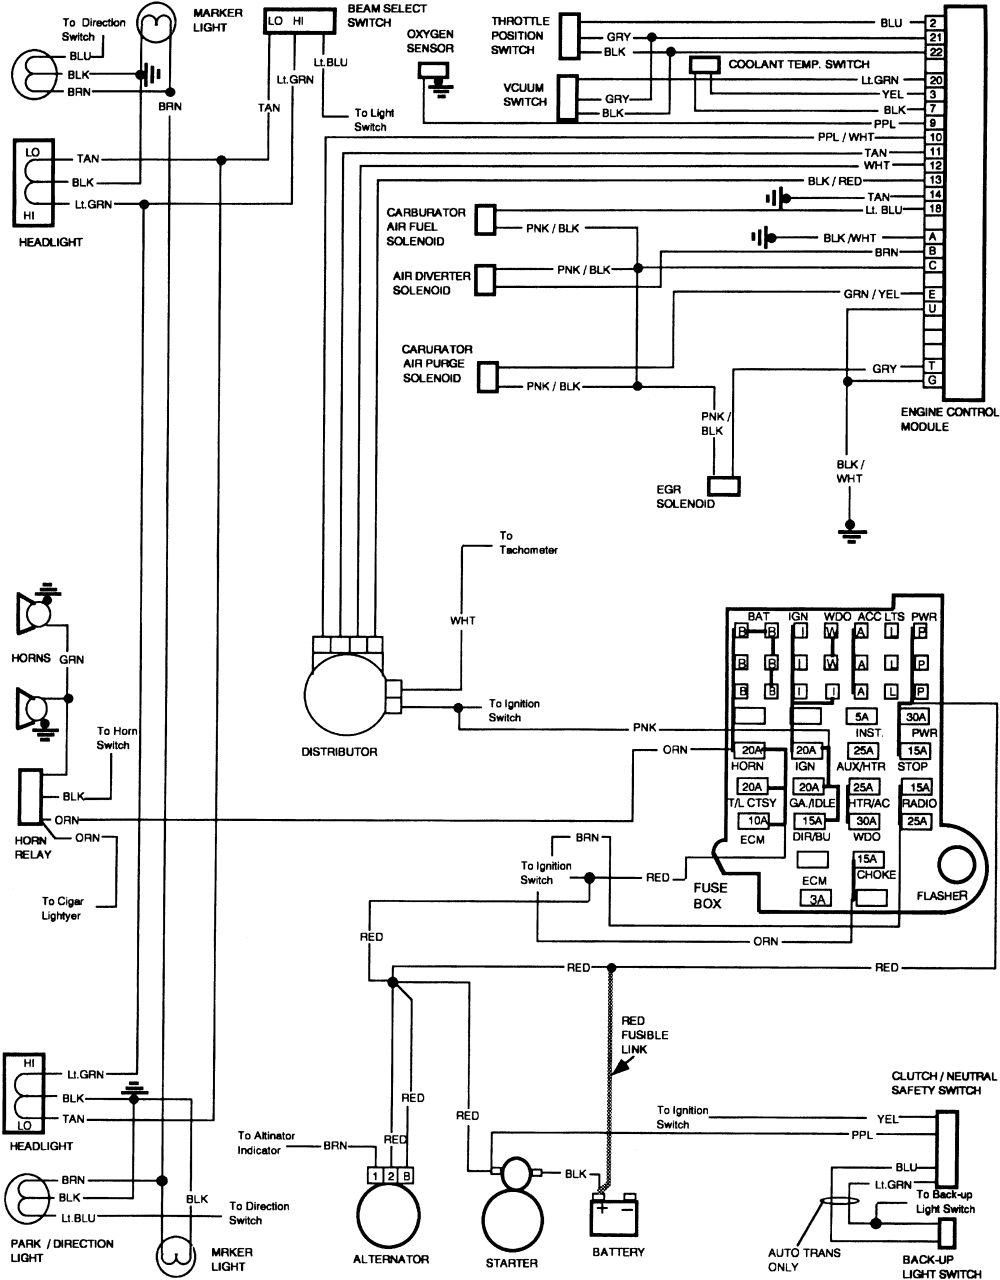 Need wiring diagram for an '85 Chevy C30 Siverado truck - Geo Metro Forum 81 Chevy C10 Wiring-Diagram Geo Metro Forum